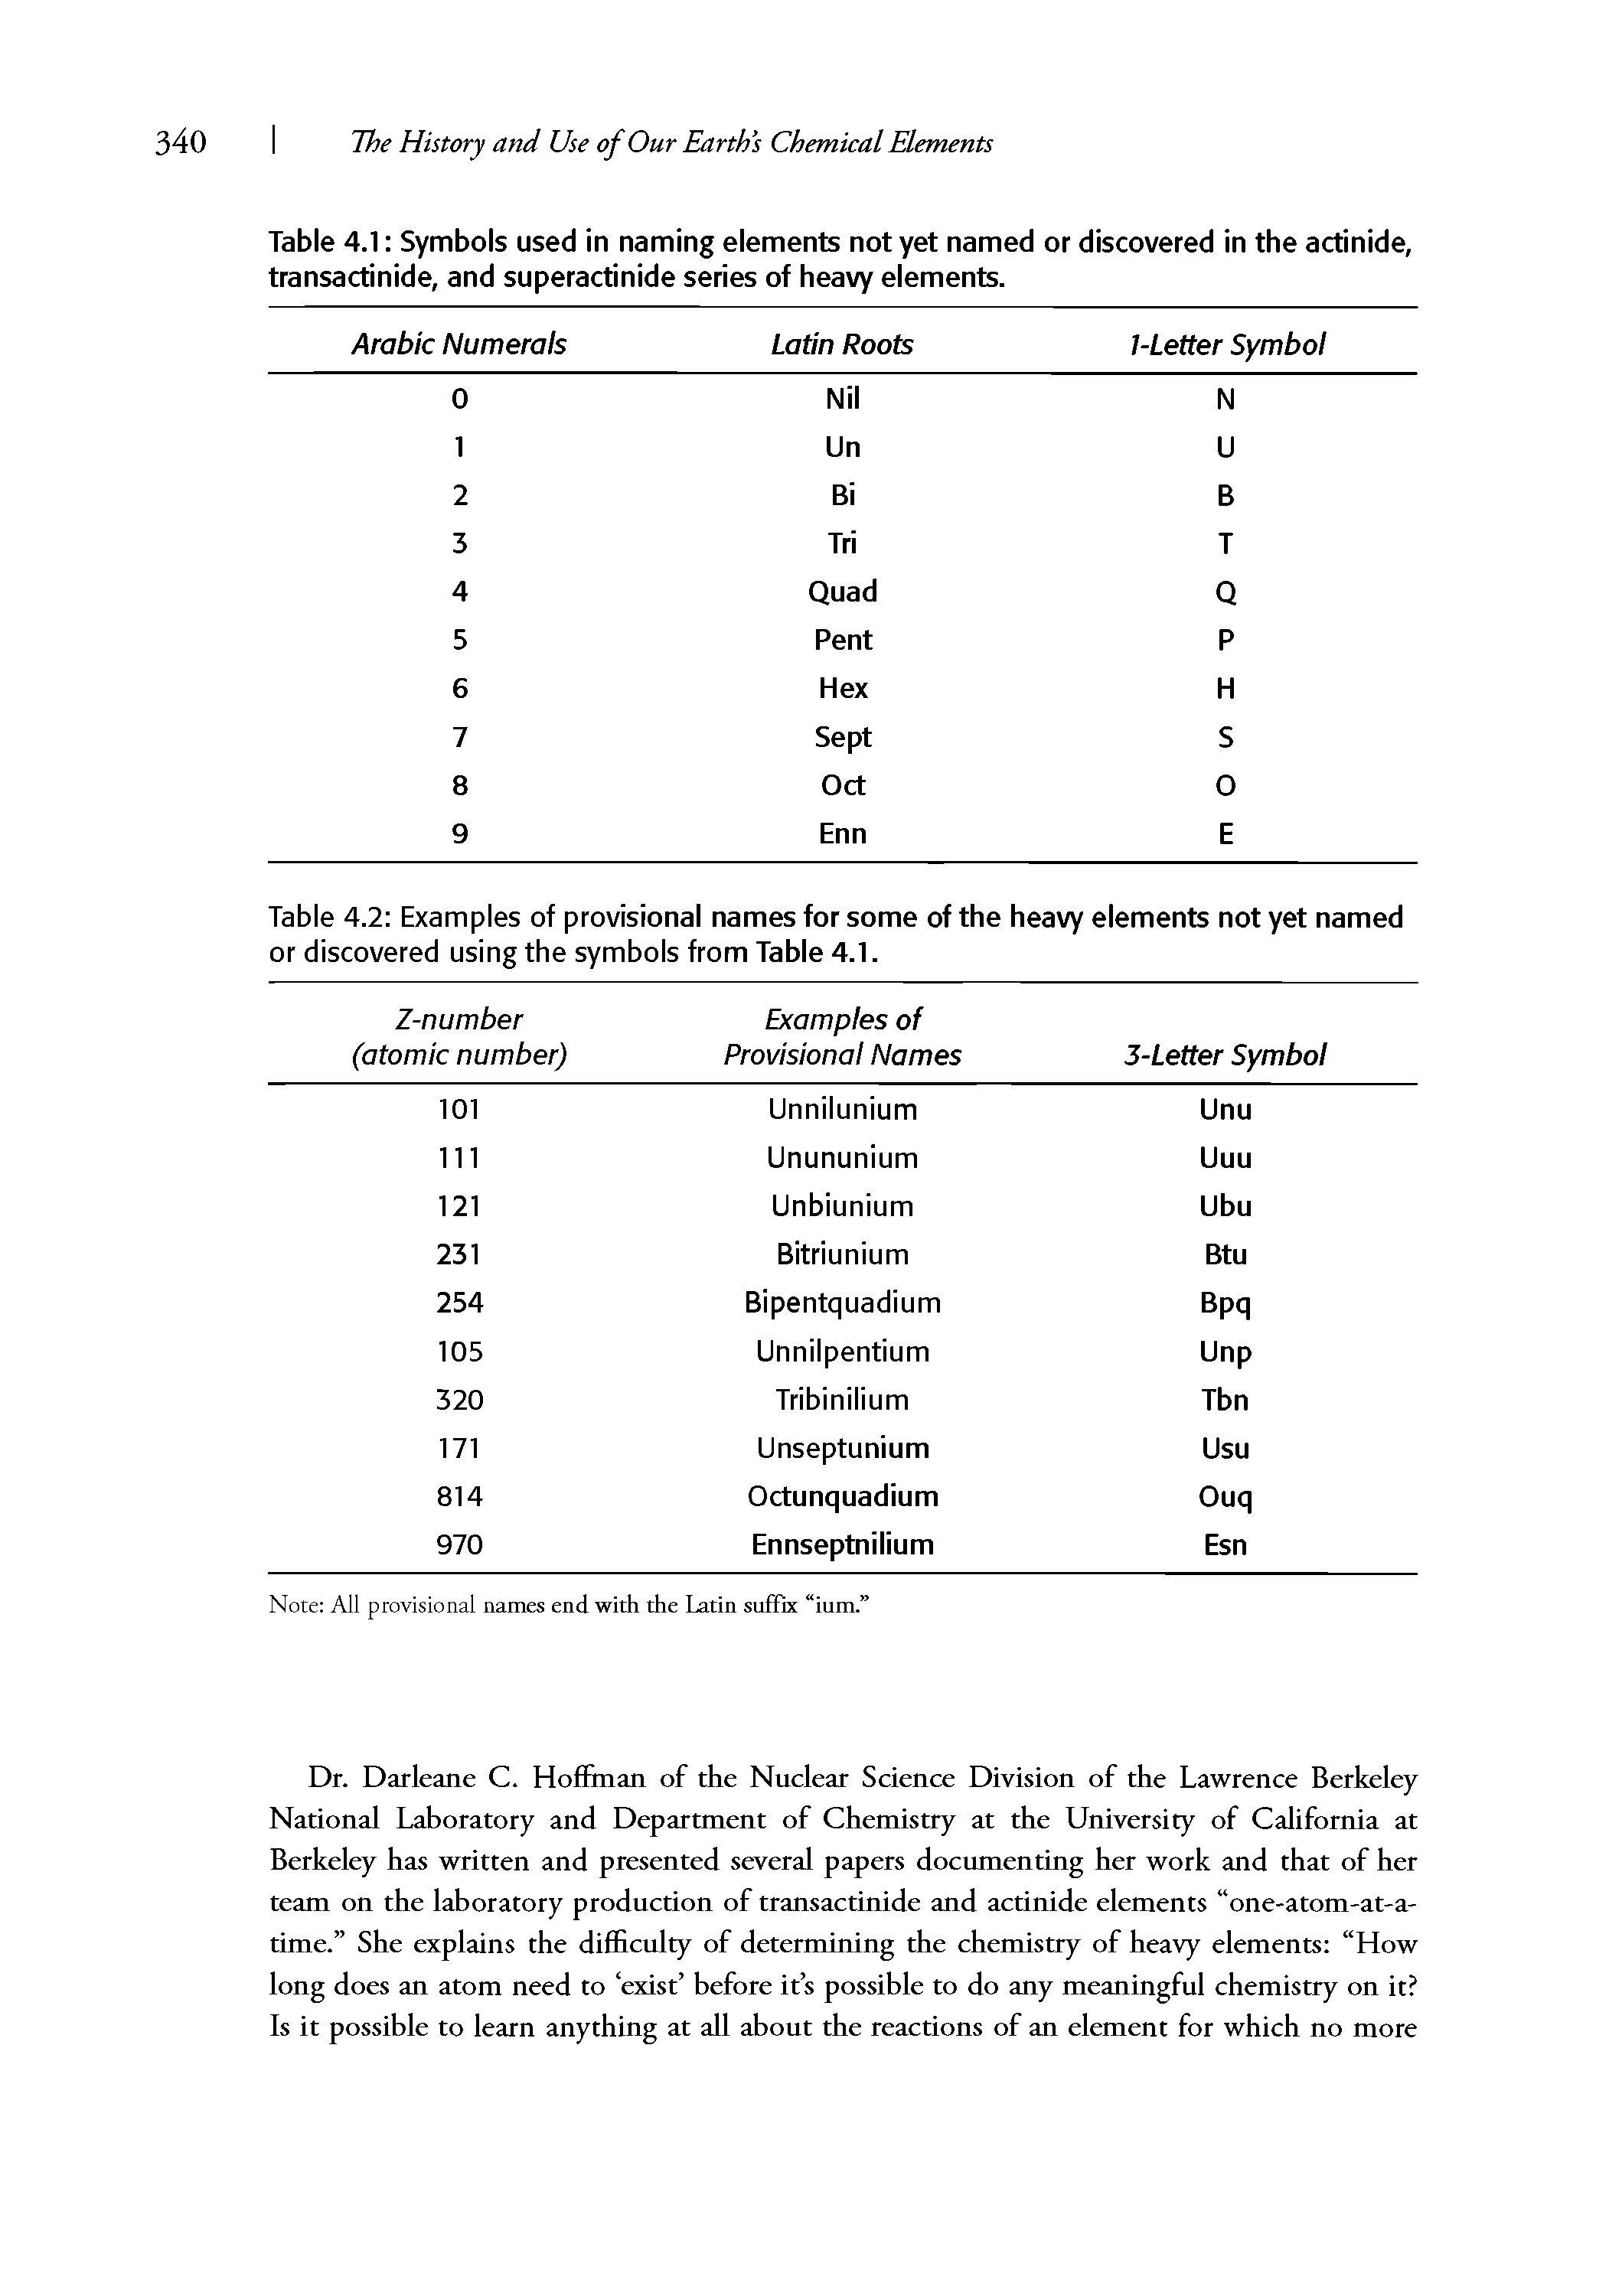 Table 4.1 Symbols used in naming elements not yet named or discovered in the actinide, transactinide, and superactinide series of heavy elements.